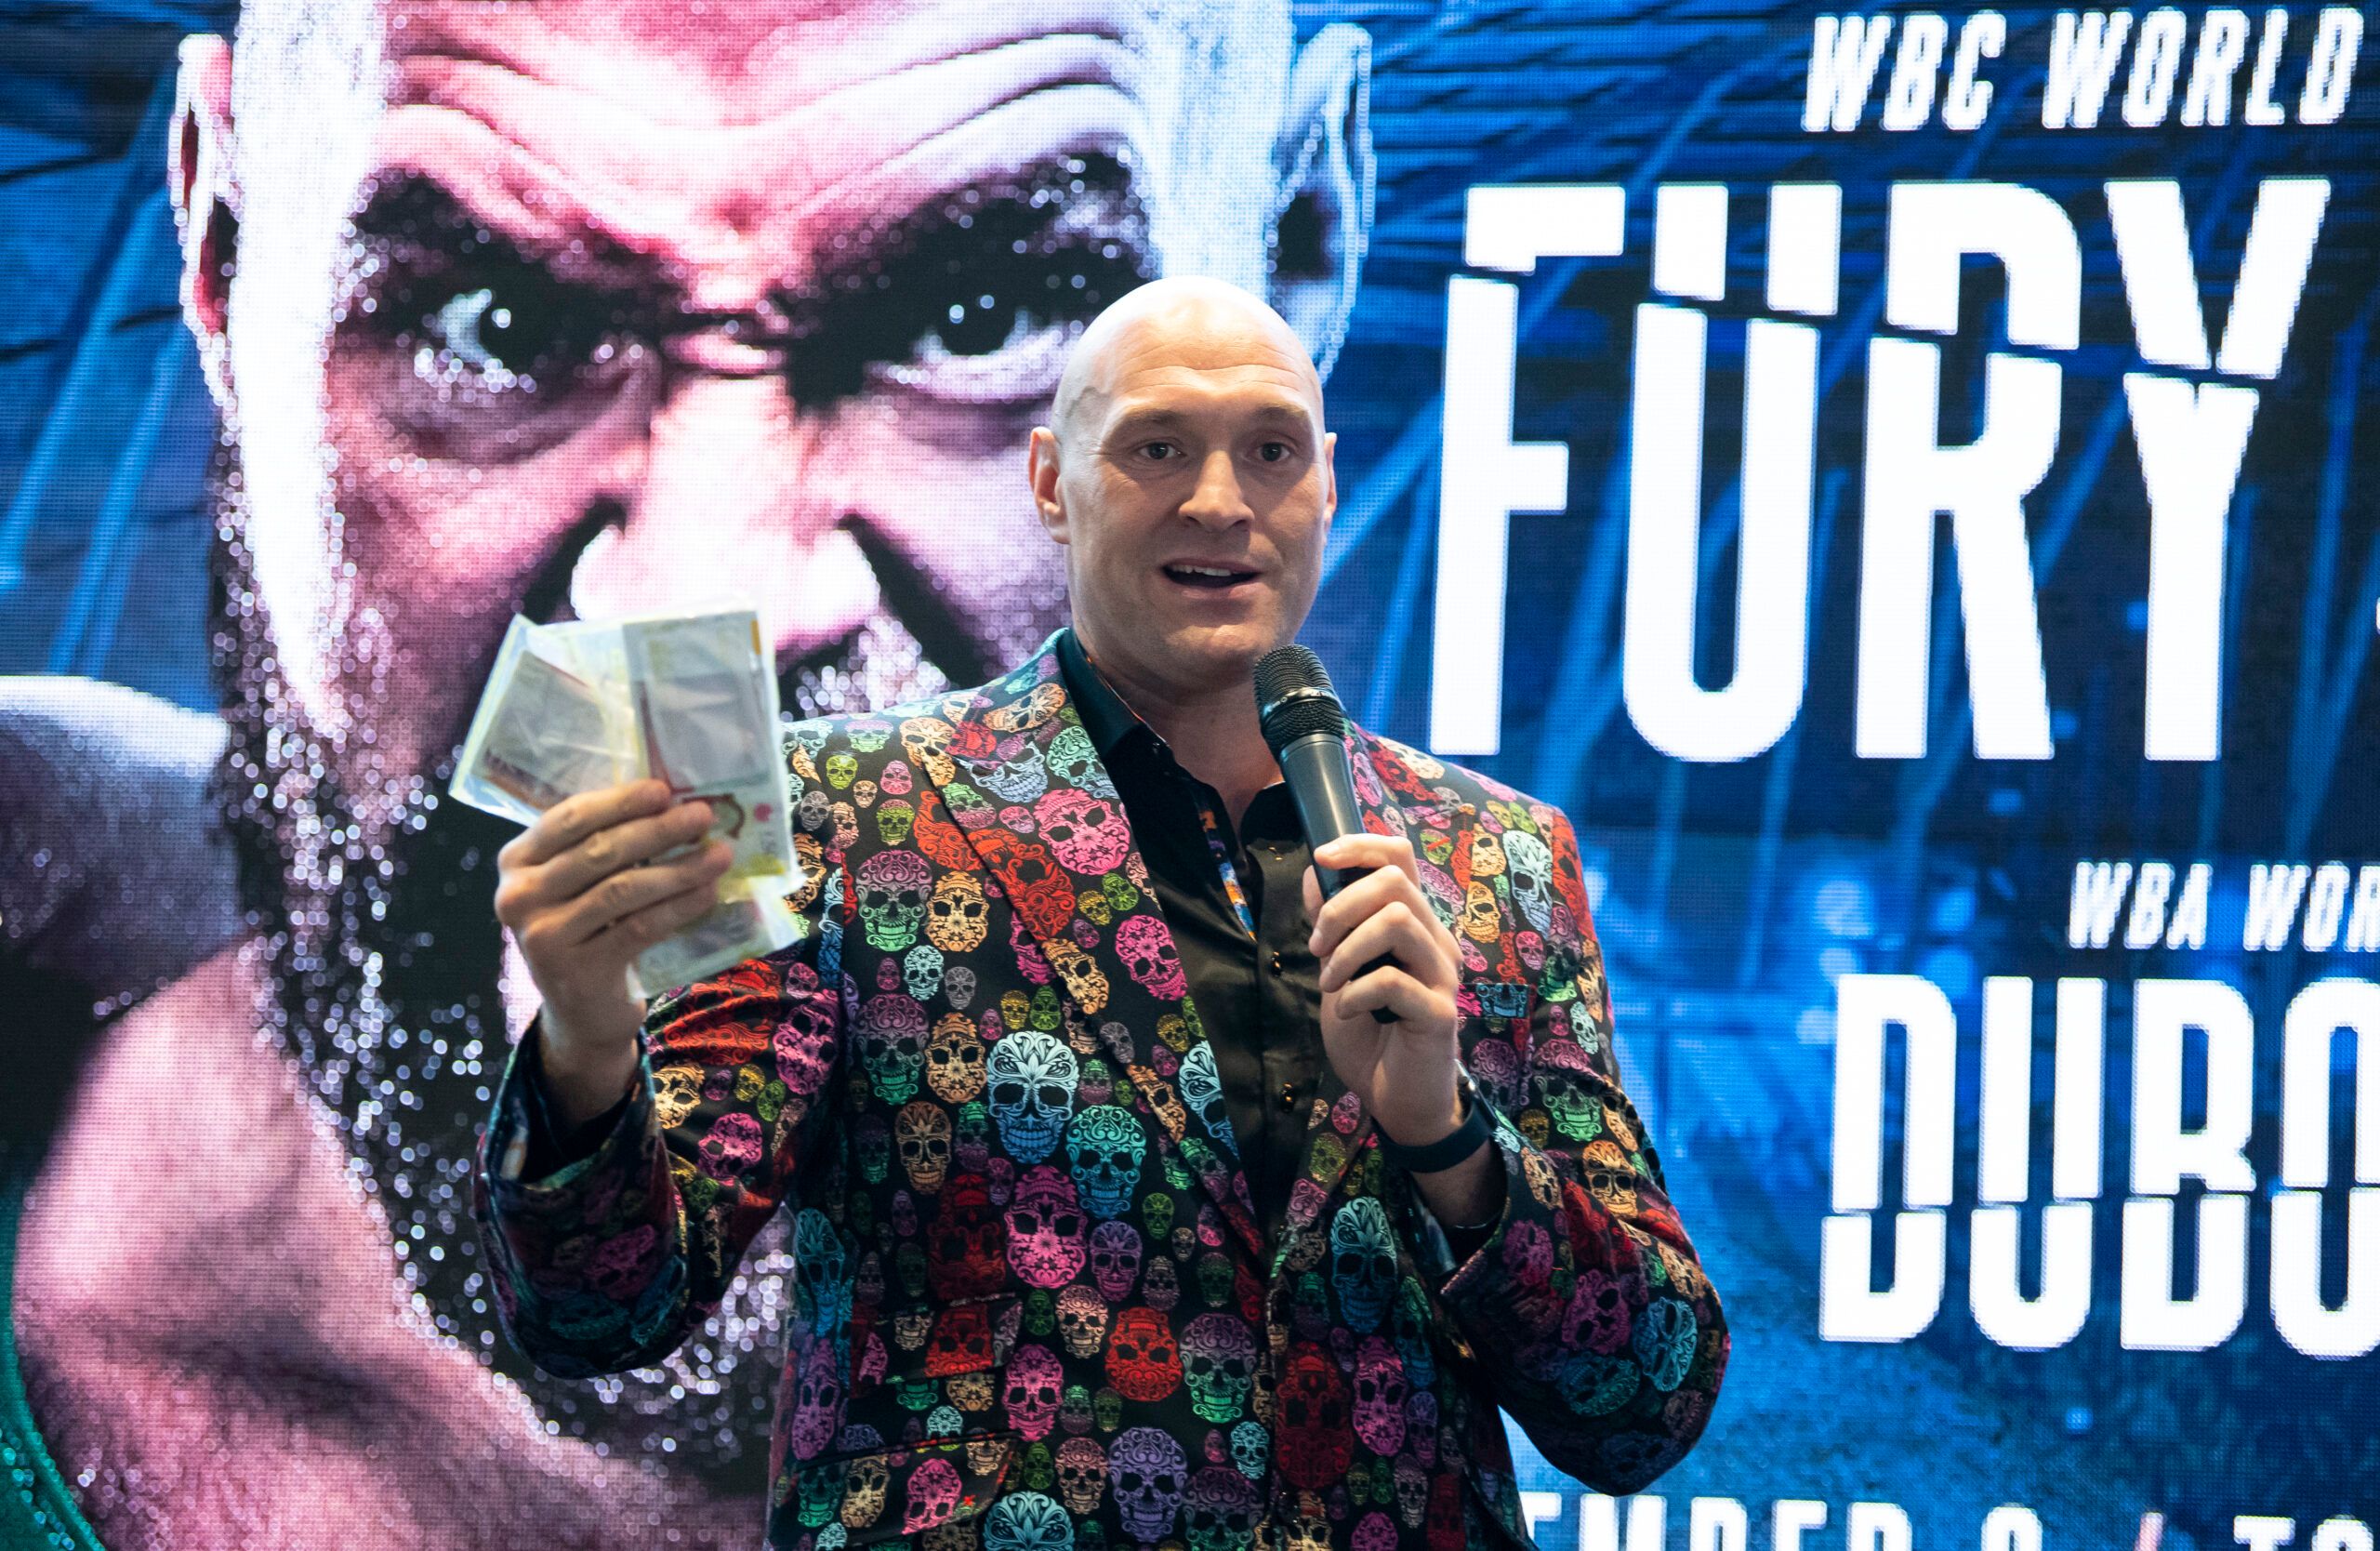 Tyson Fury is releasing a cover of Neil Diamond's classic 'Sweet Caroline' to raise money for men's mental health charity TalkClub